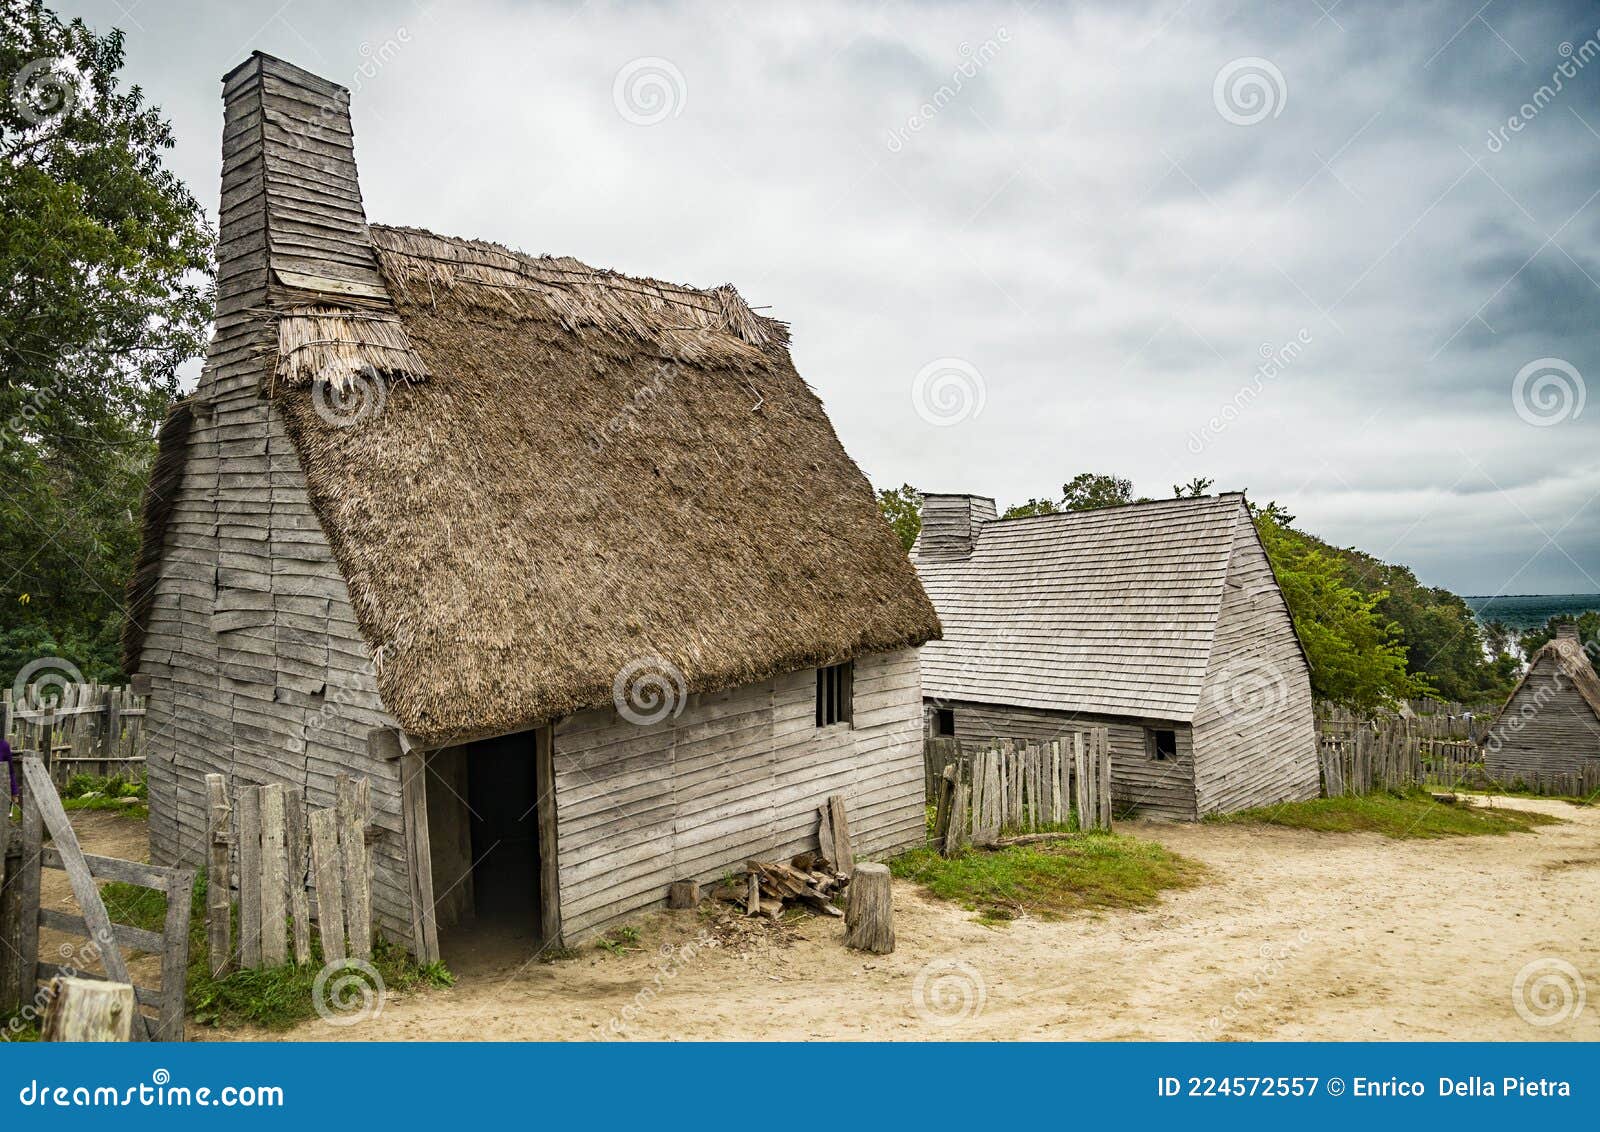 old buildings in plimoth plantation at plymouth, ma